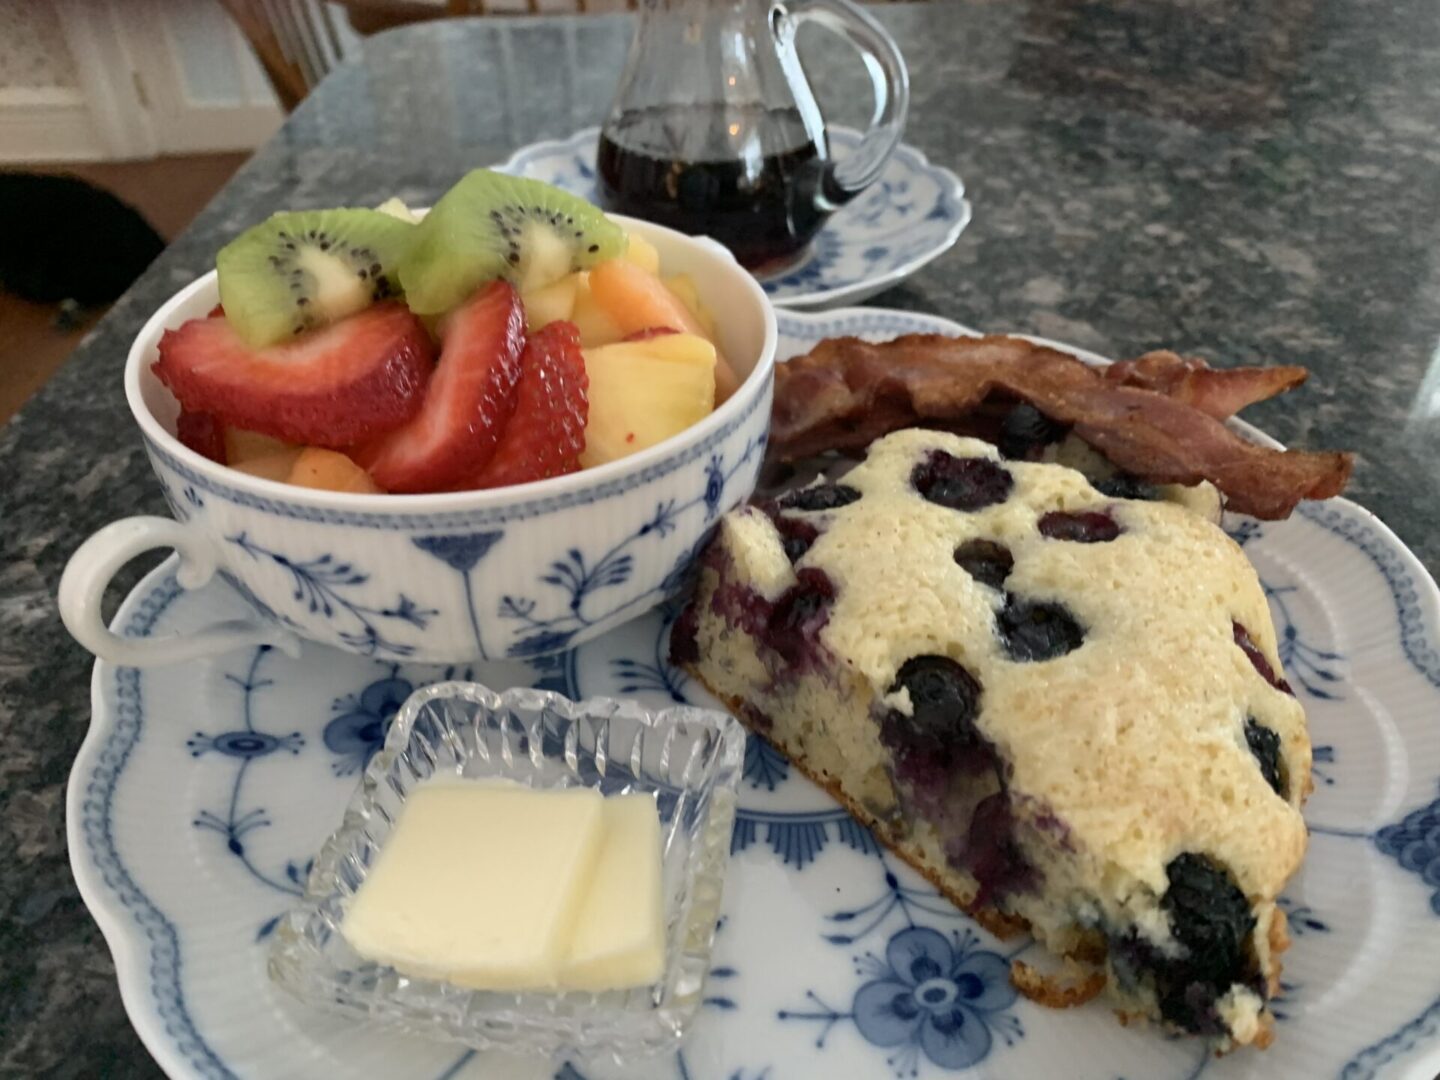 A plate of food with fruit and a slice of cake.